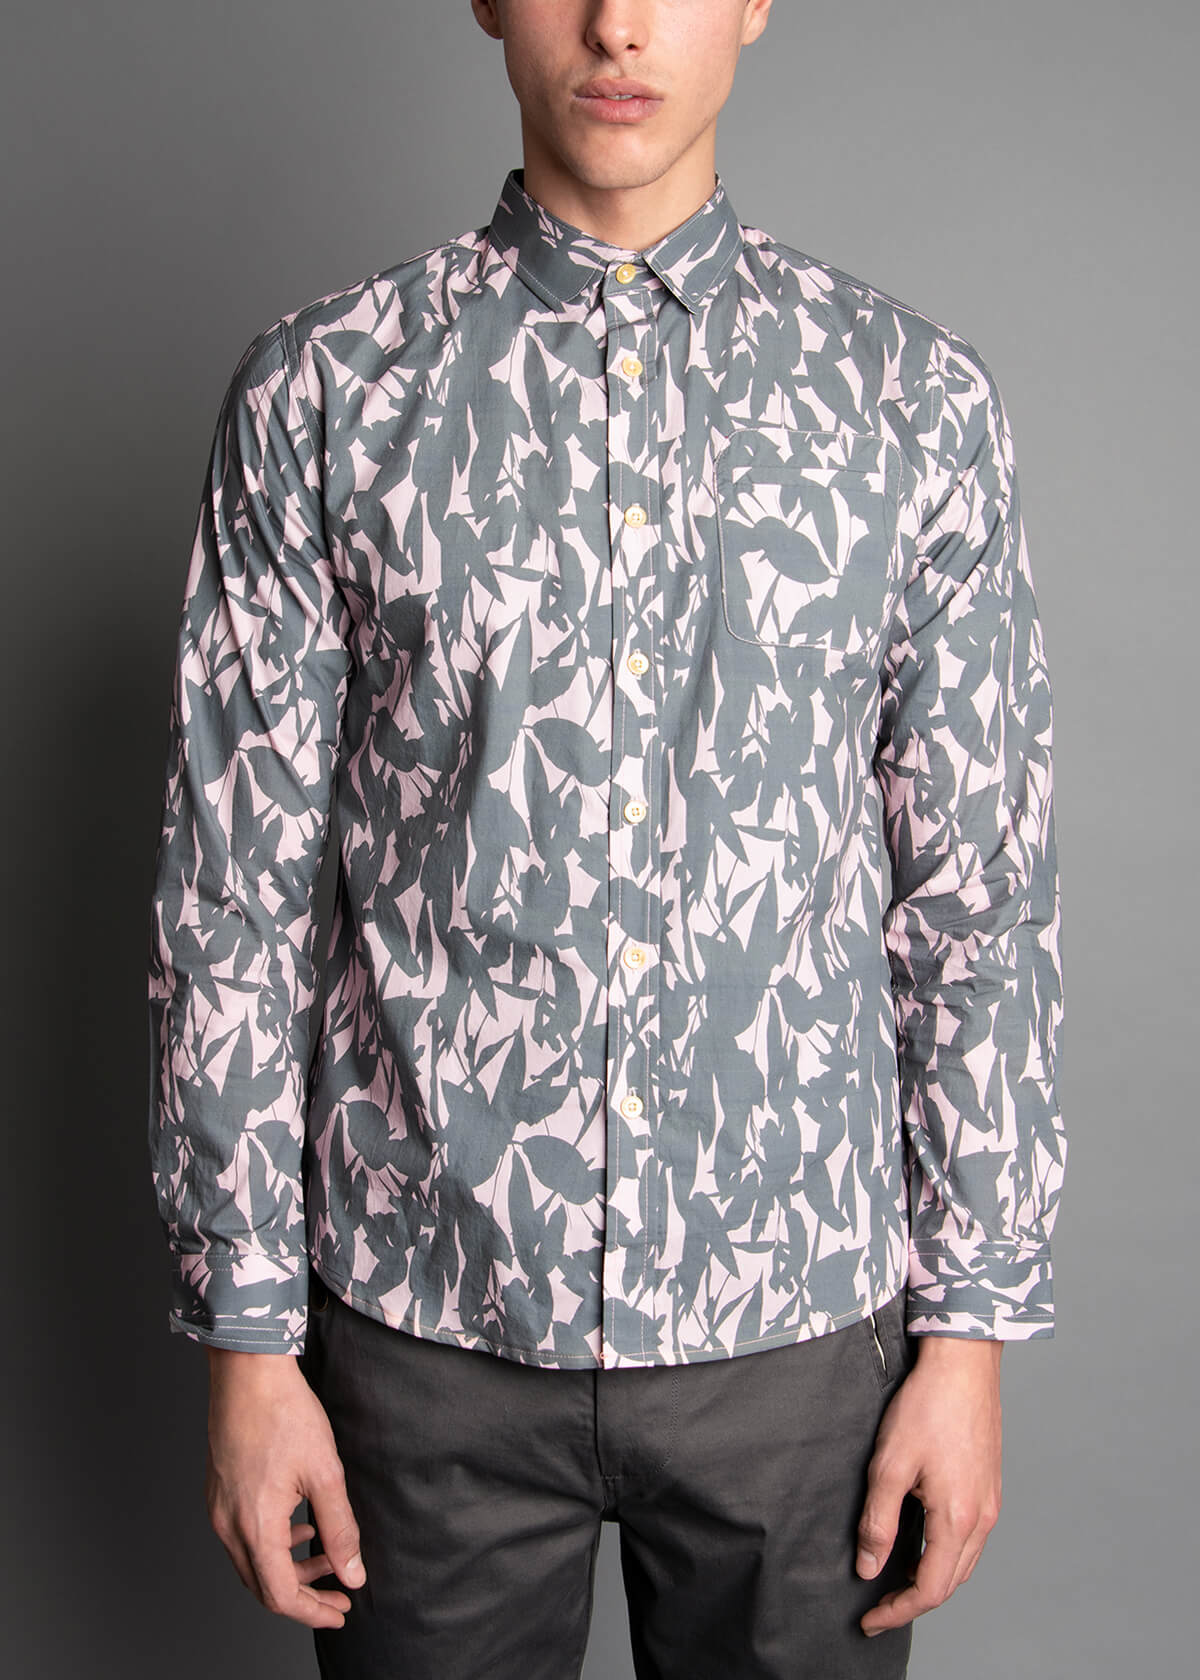 charcoal and rose abstract floral print men's shirt